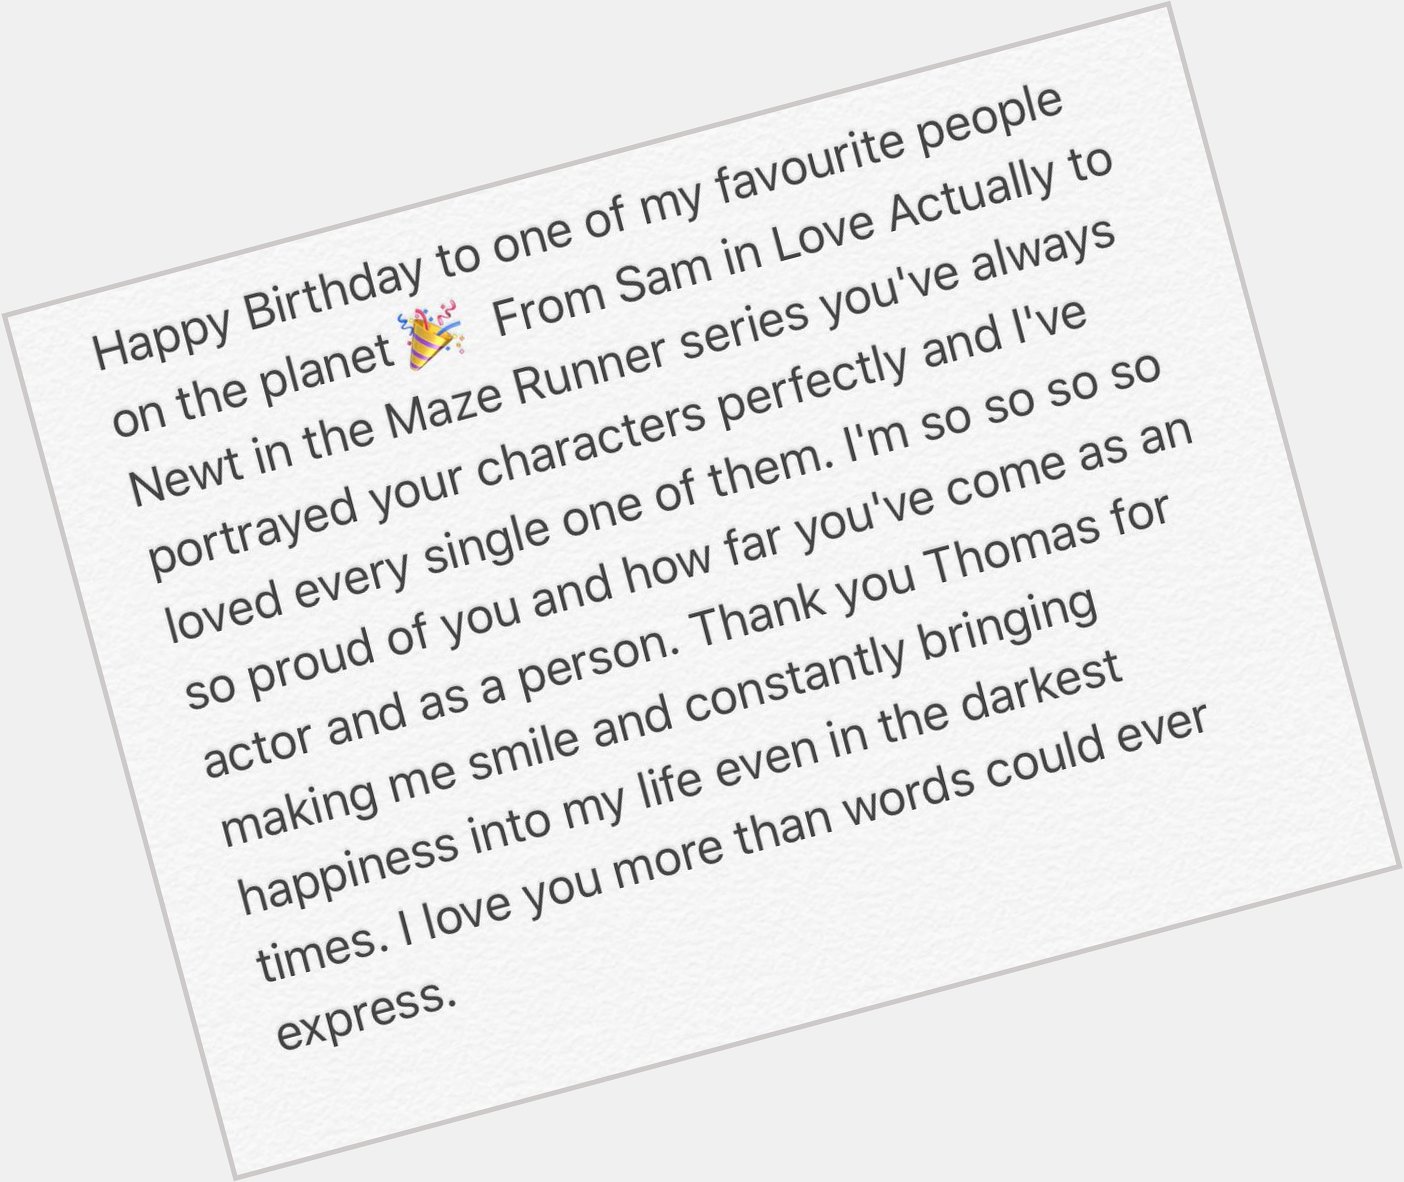 Happy 28th Birthday Thomas Brodie Sangster I love you more than anything 